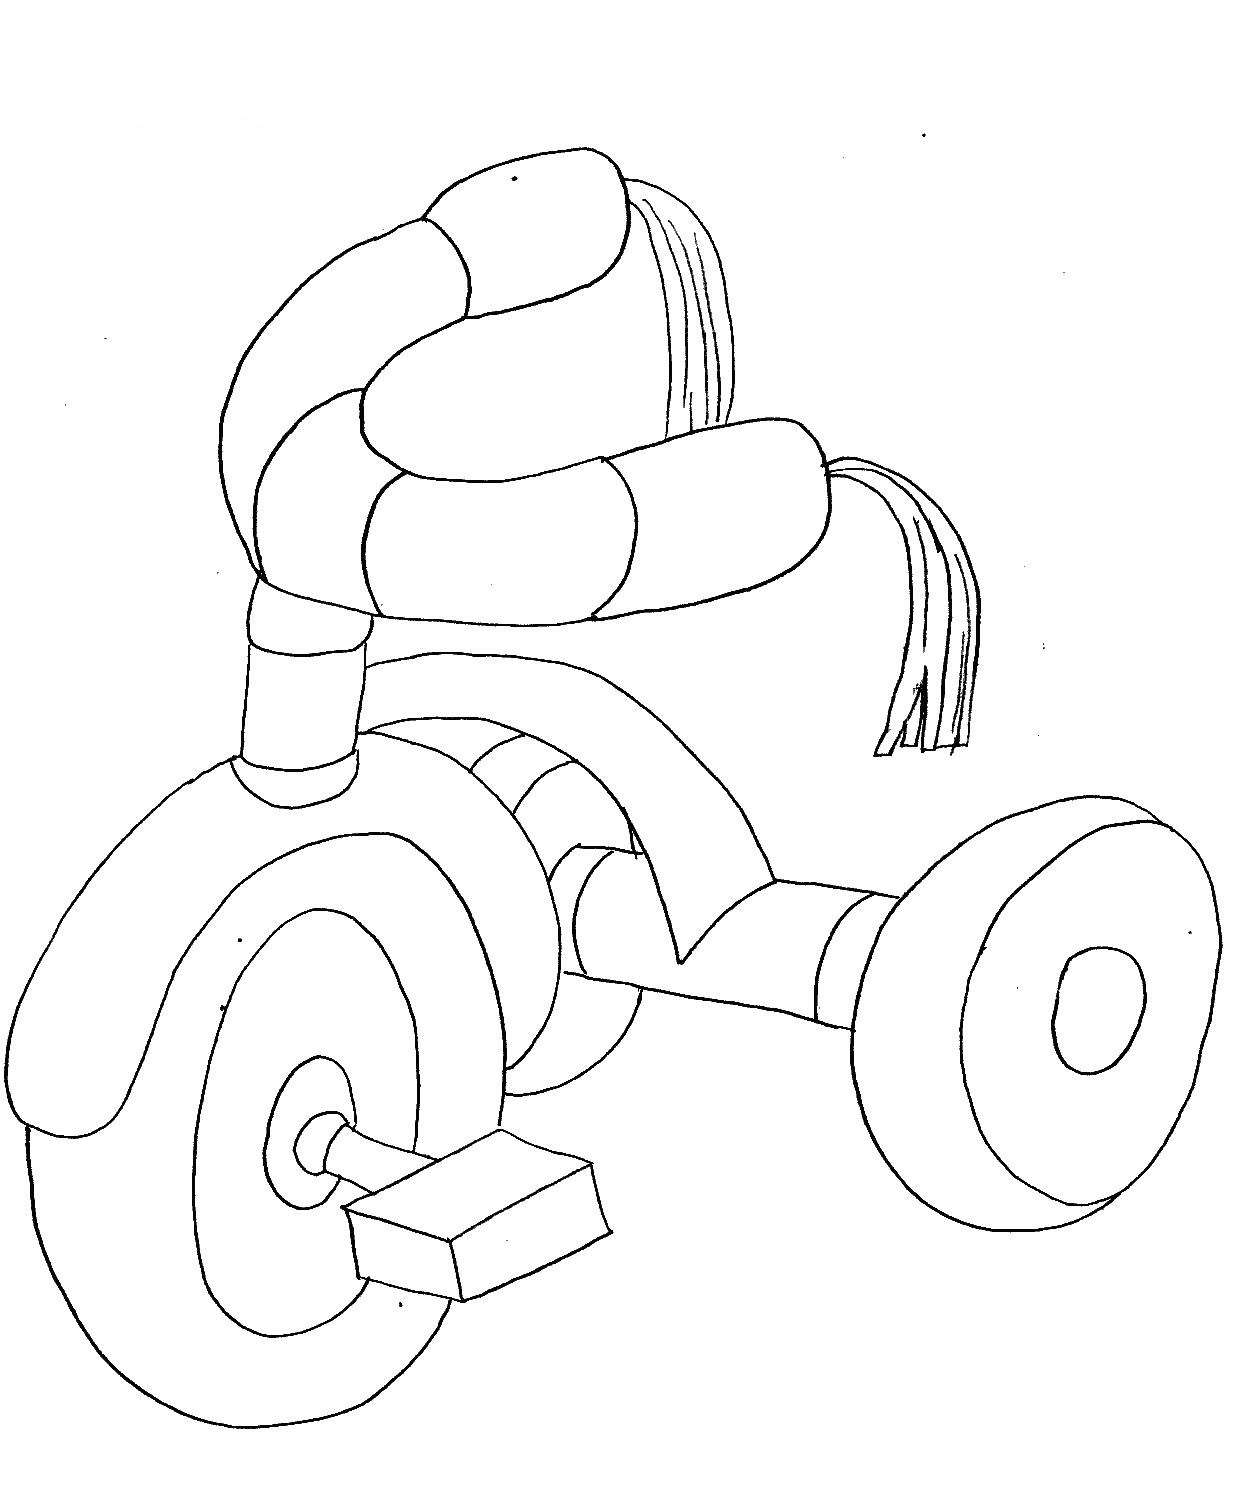 Tricycle Transportation Coloring Pages coloring page & book for kids.